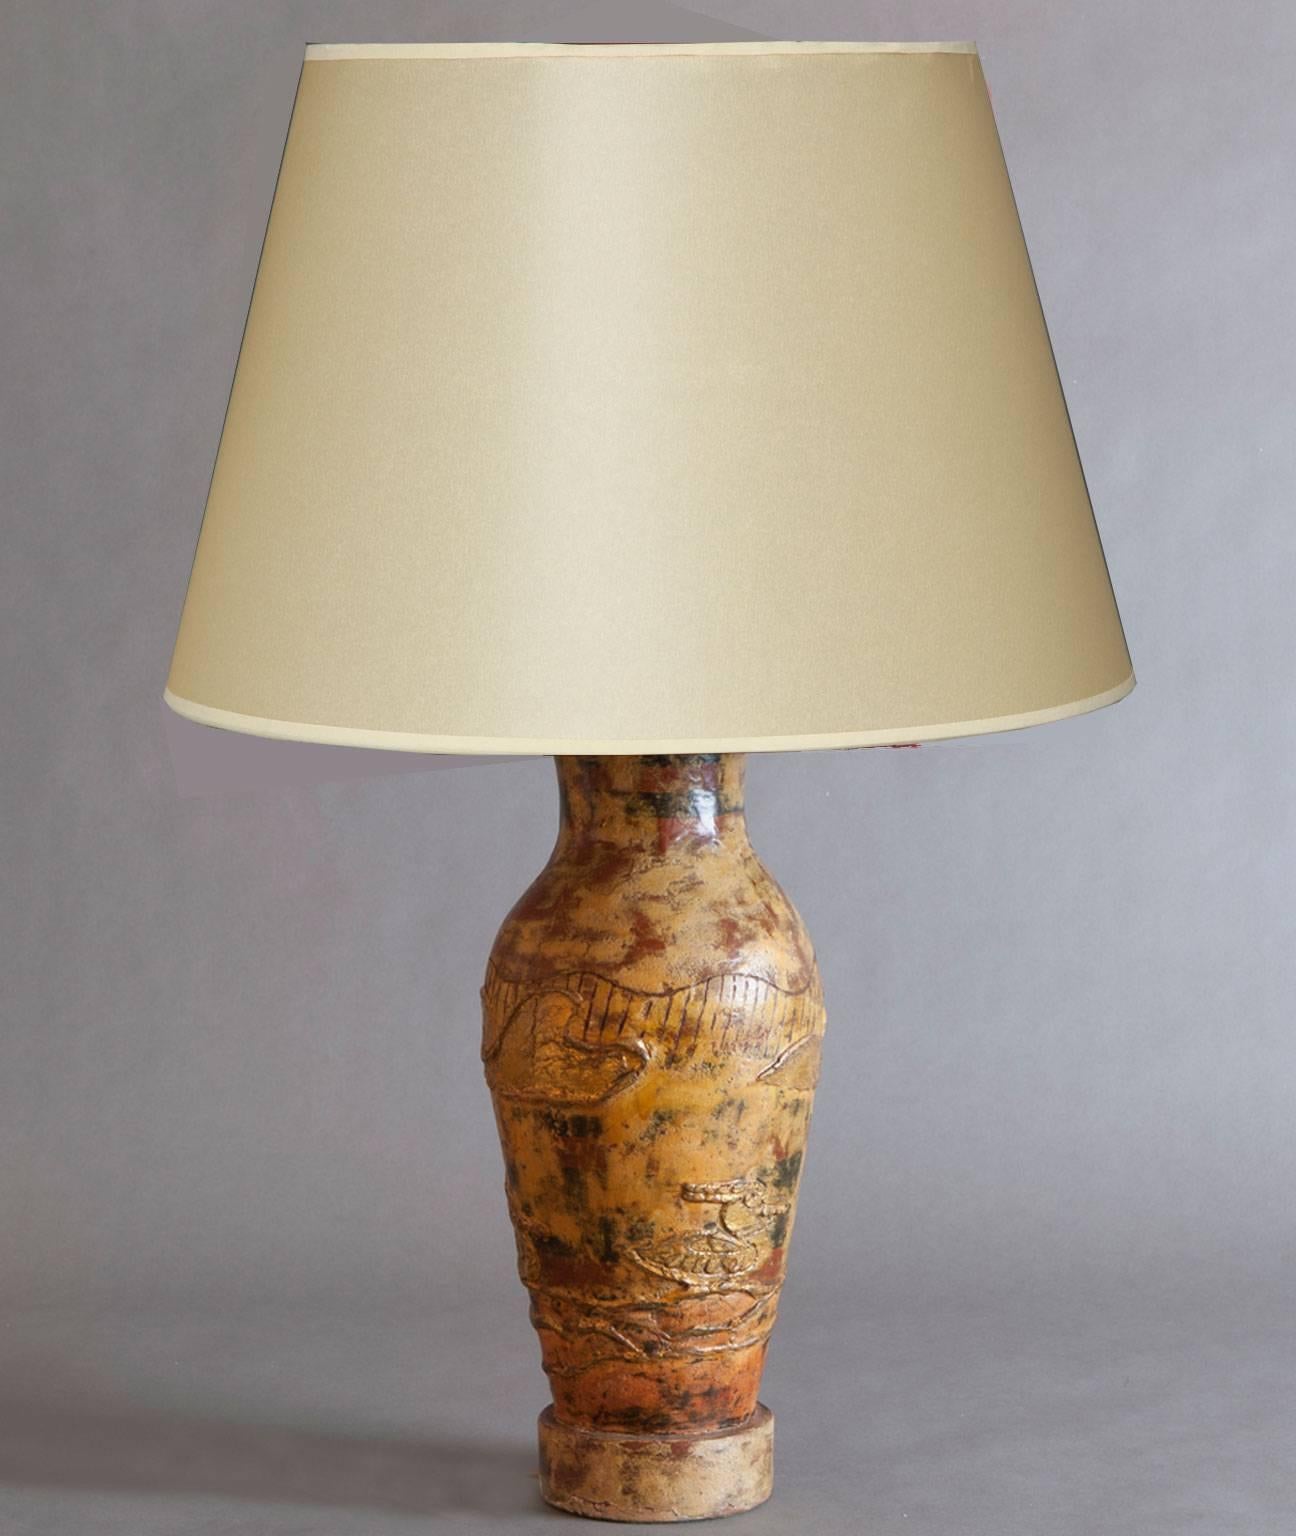 Marianna von Allesch papier mâché table lamp with chinoiserie painted decoration and gold leaf. Original finial.
Lampshade not included.
Signed: Mariana von Allesch.
American, circa 1950.